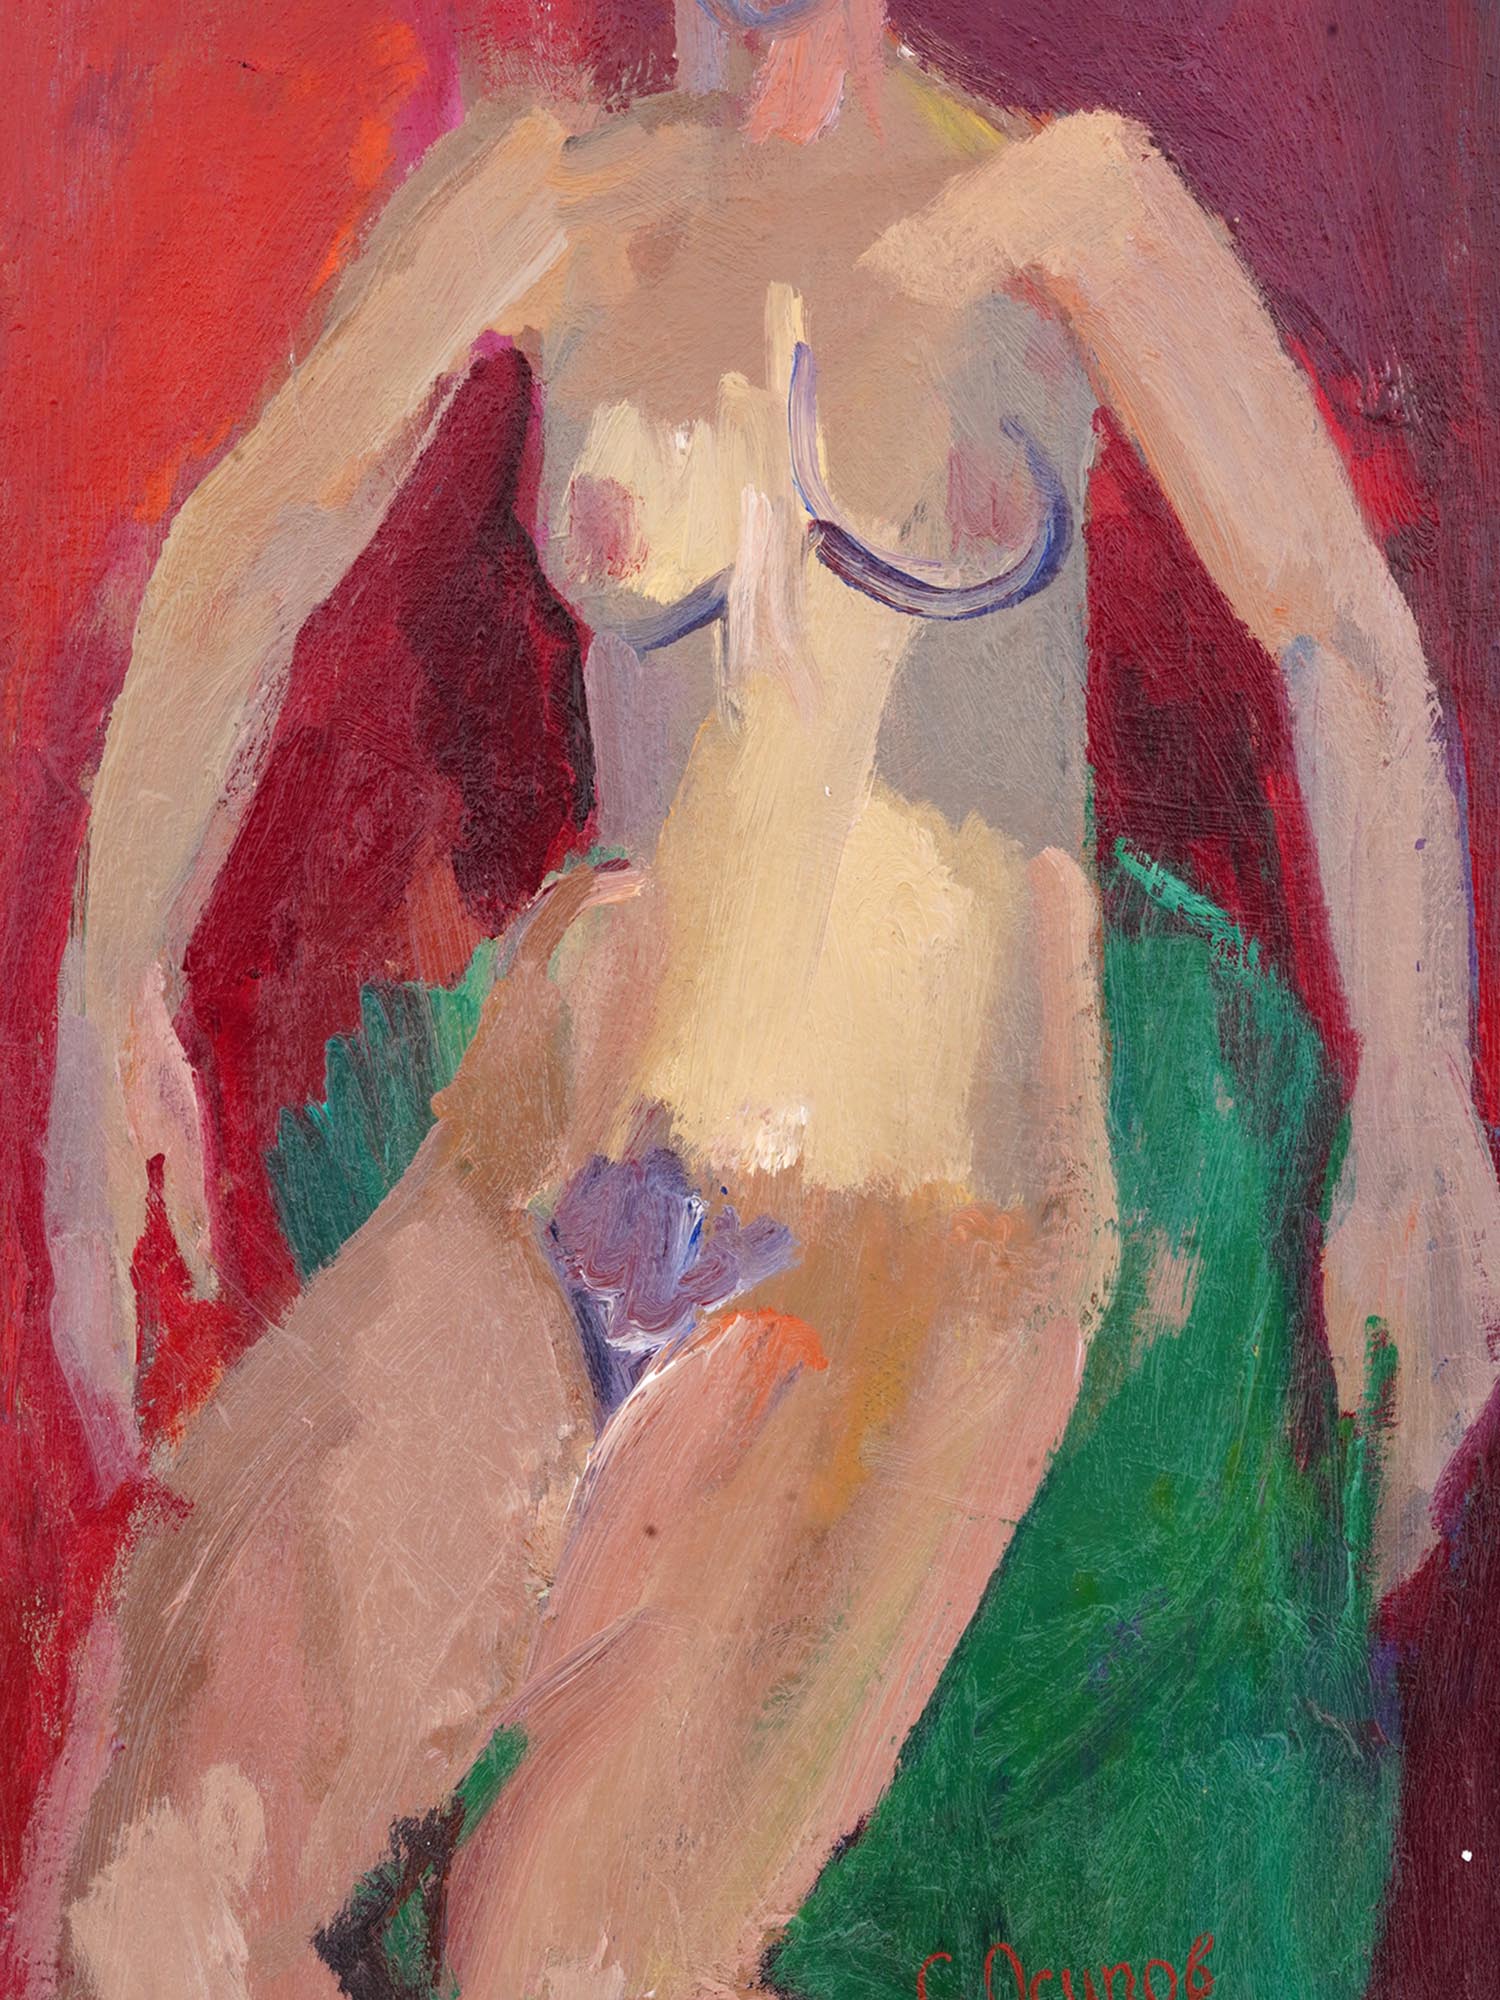 RUSSIAN NUDE FEMALE PAINTING BY SERGEI OSIPOV PIC-1